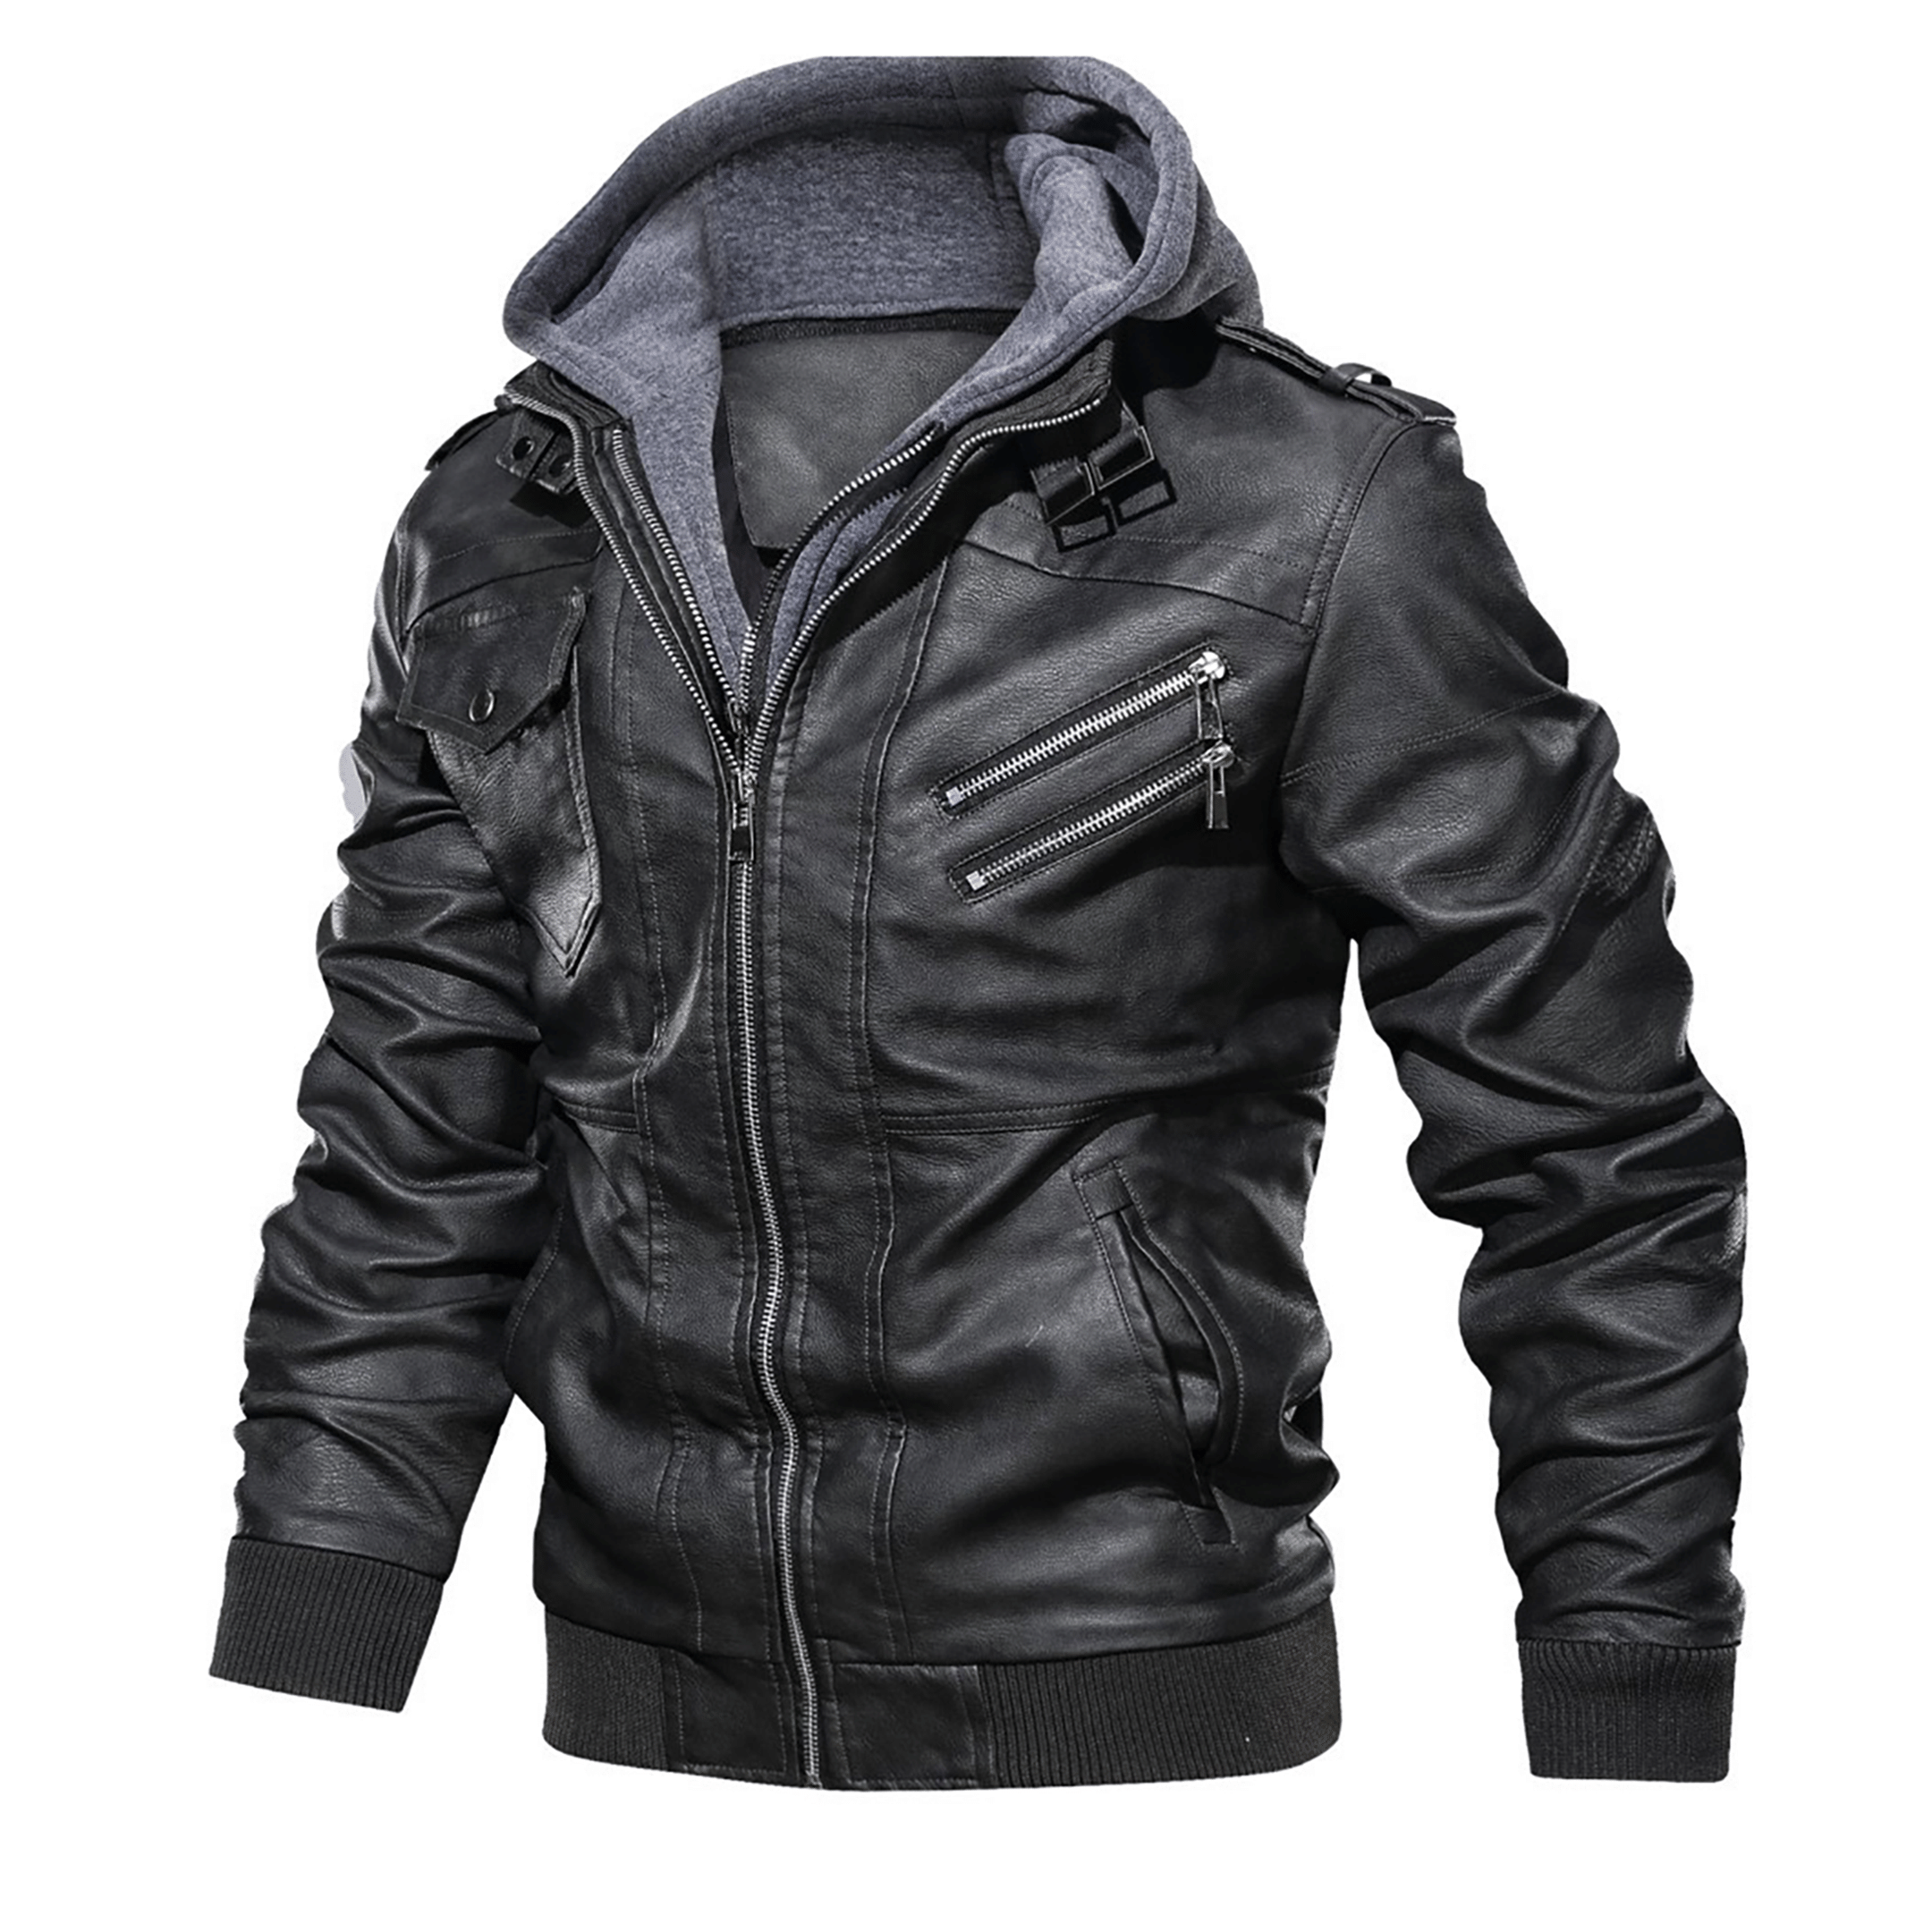 Top leather jackets and latest products 165